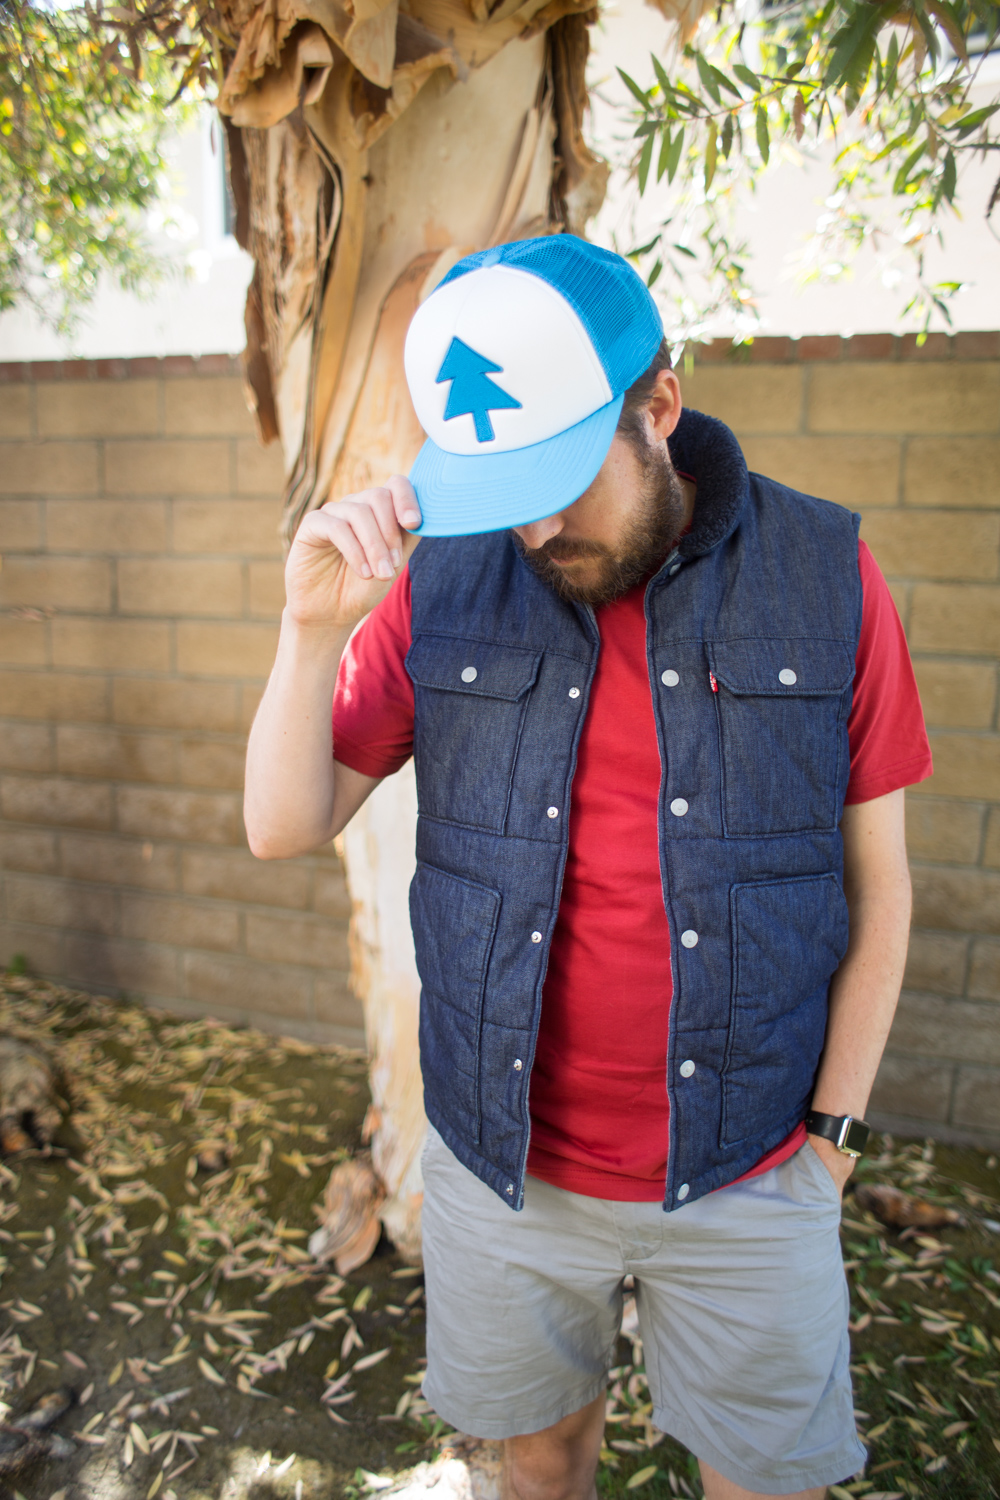 Dipper Pines From Gravity Falls Disney Bounding Outfit